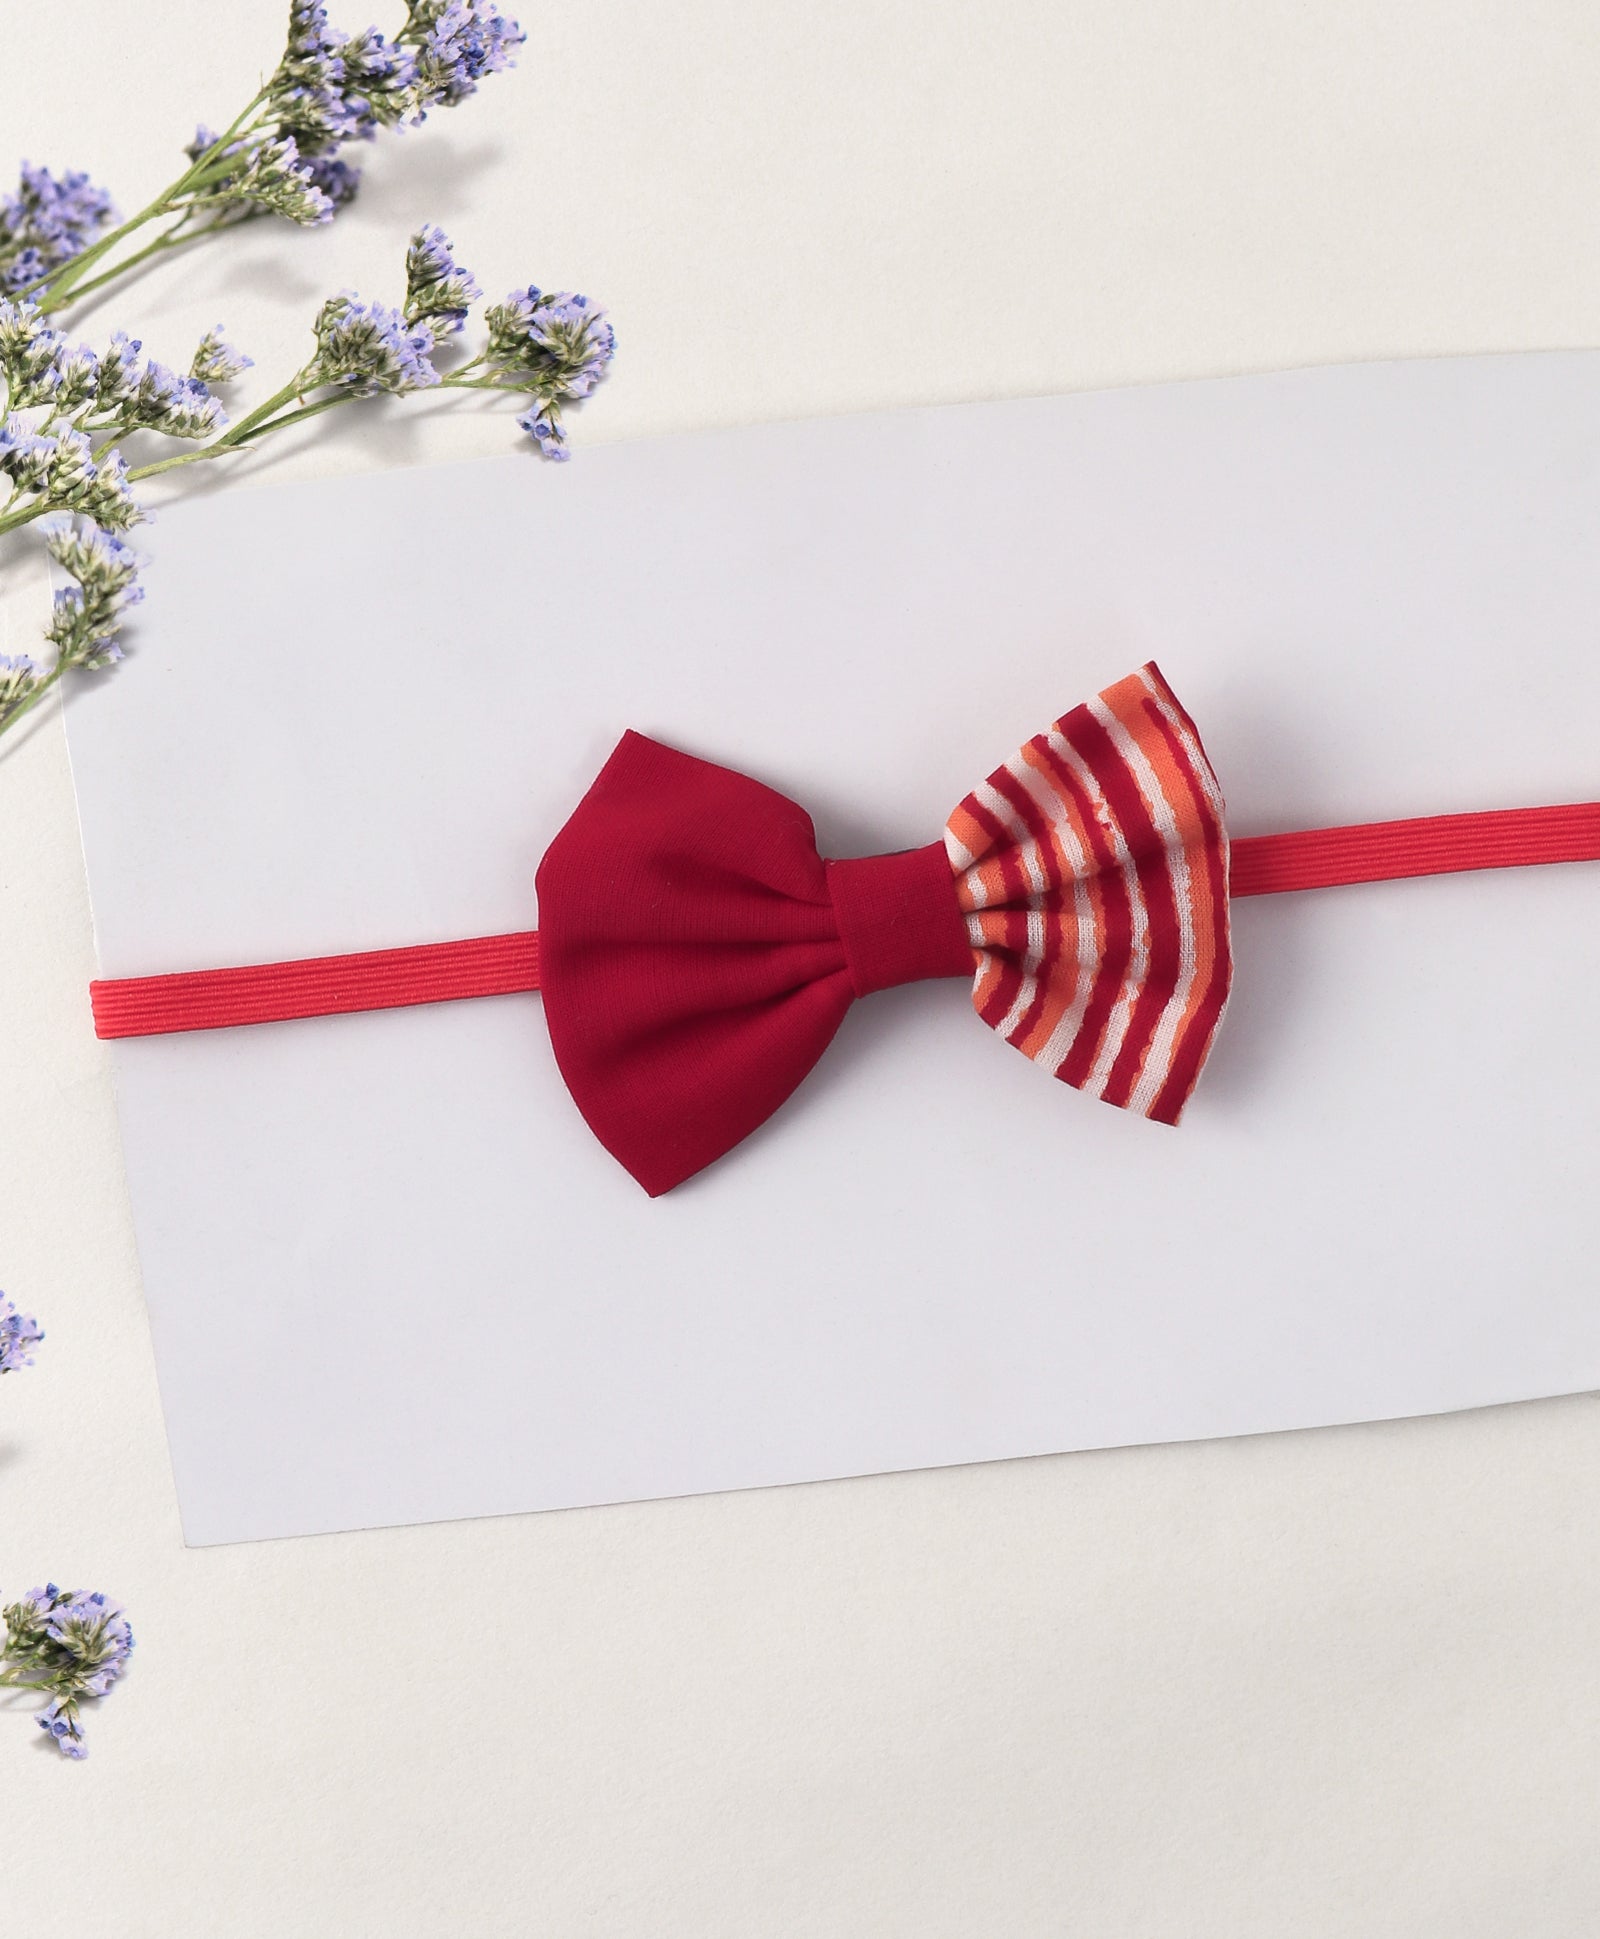 Double Print Striped Bow Headband - Red